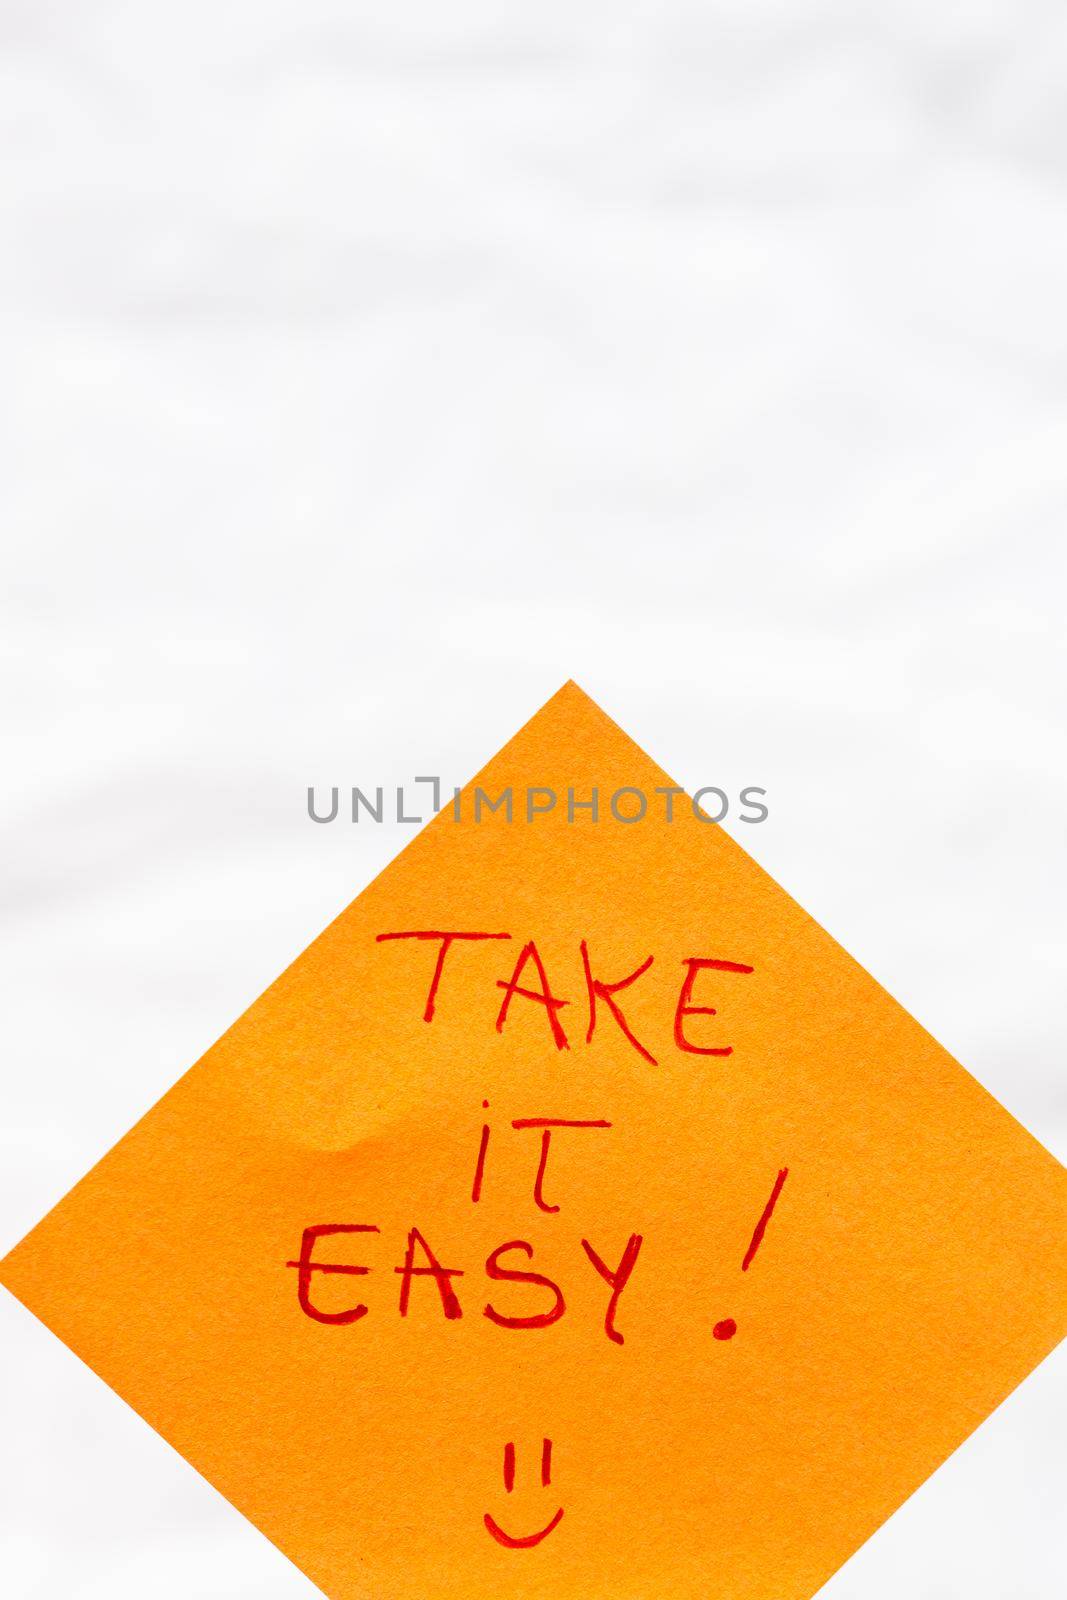 Take it easy handwriting text close up isolated on orange paper with copy space.